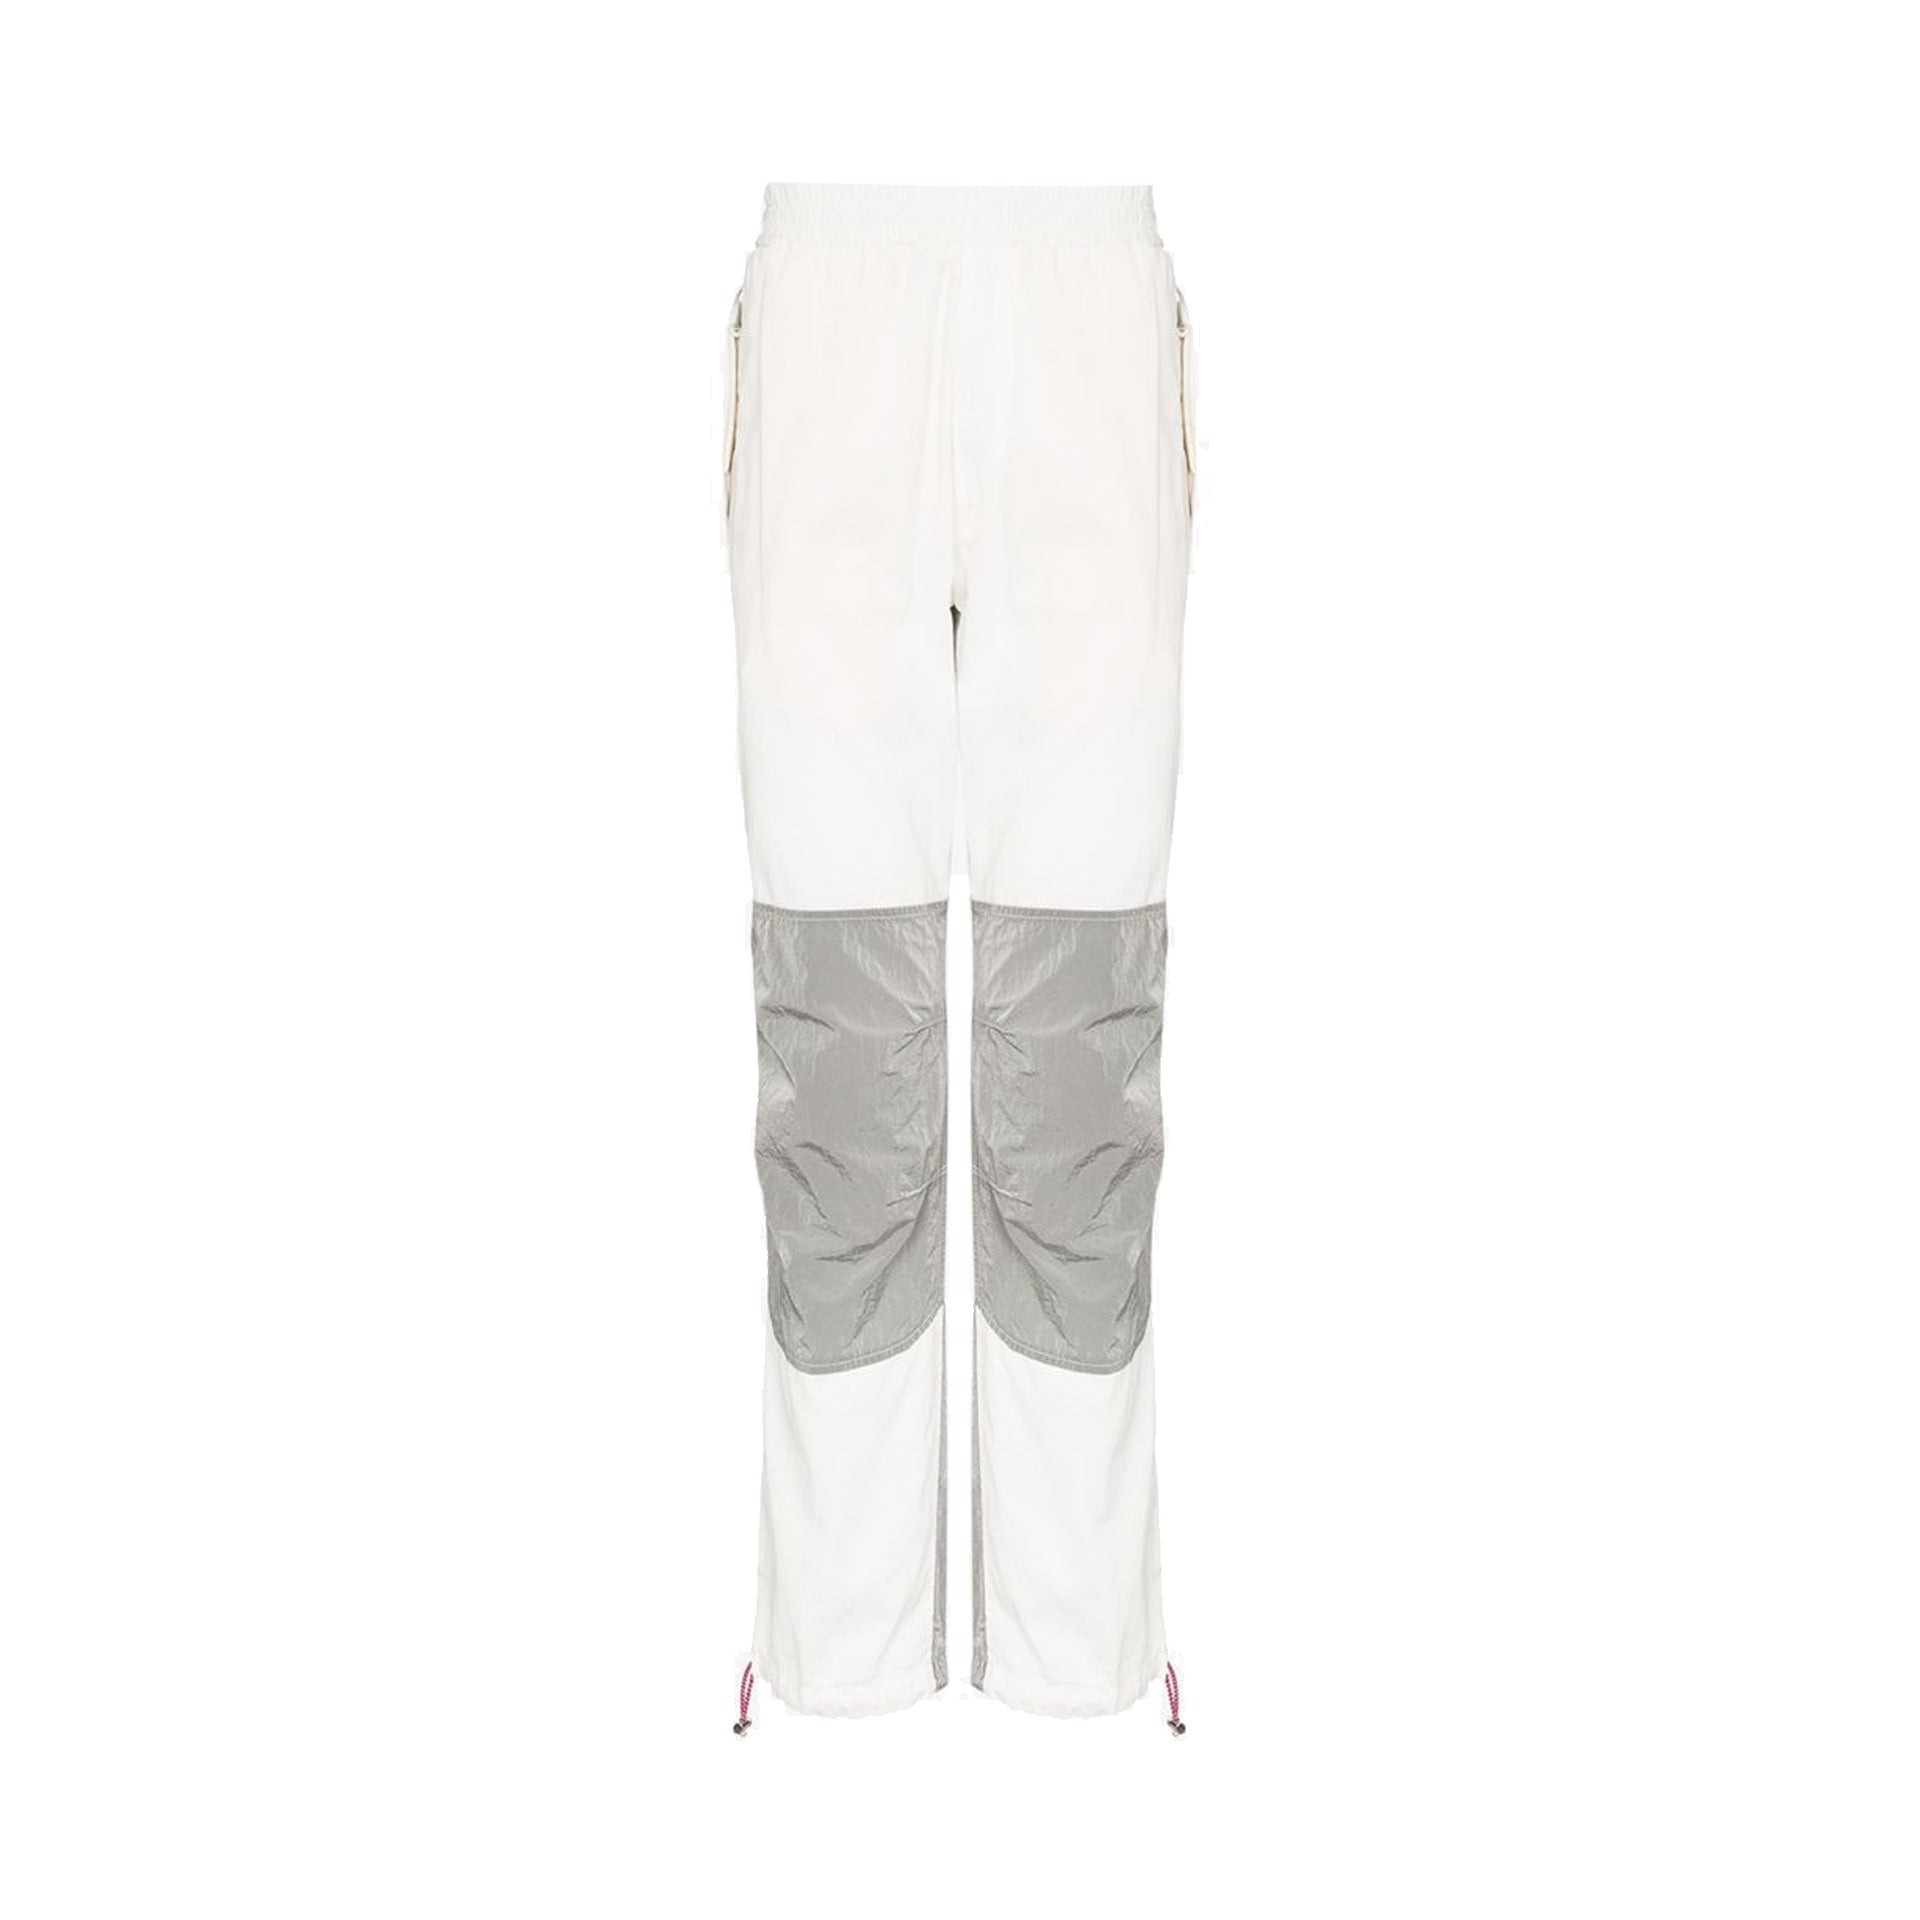 MONCLER-OUTLET-SALE-Moncler-1952-Two-Tone-Track-Pants-Hosen-WHITE-48-ARCHIVE-COLLECTION.jpg